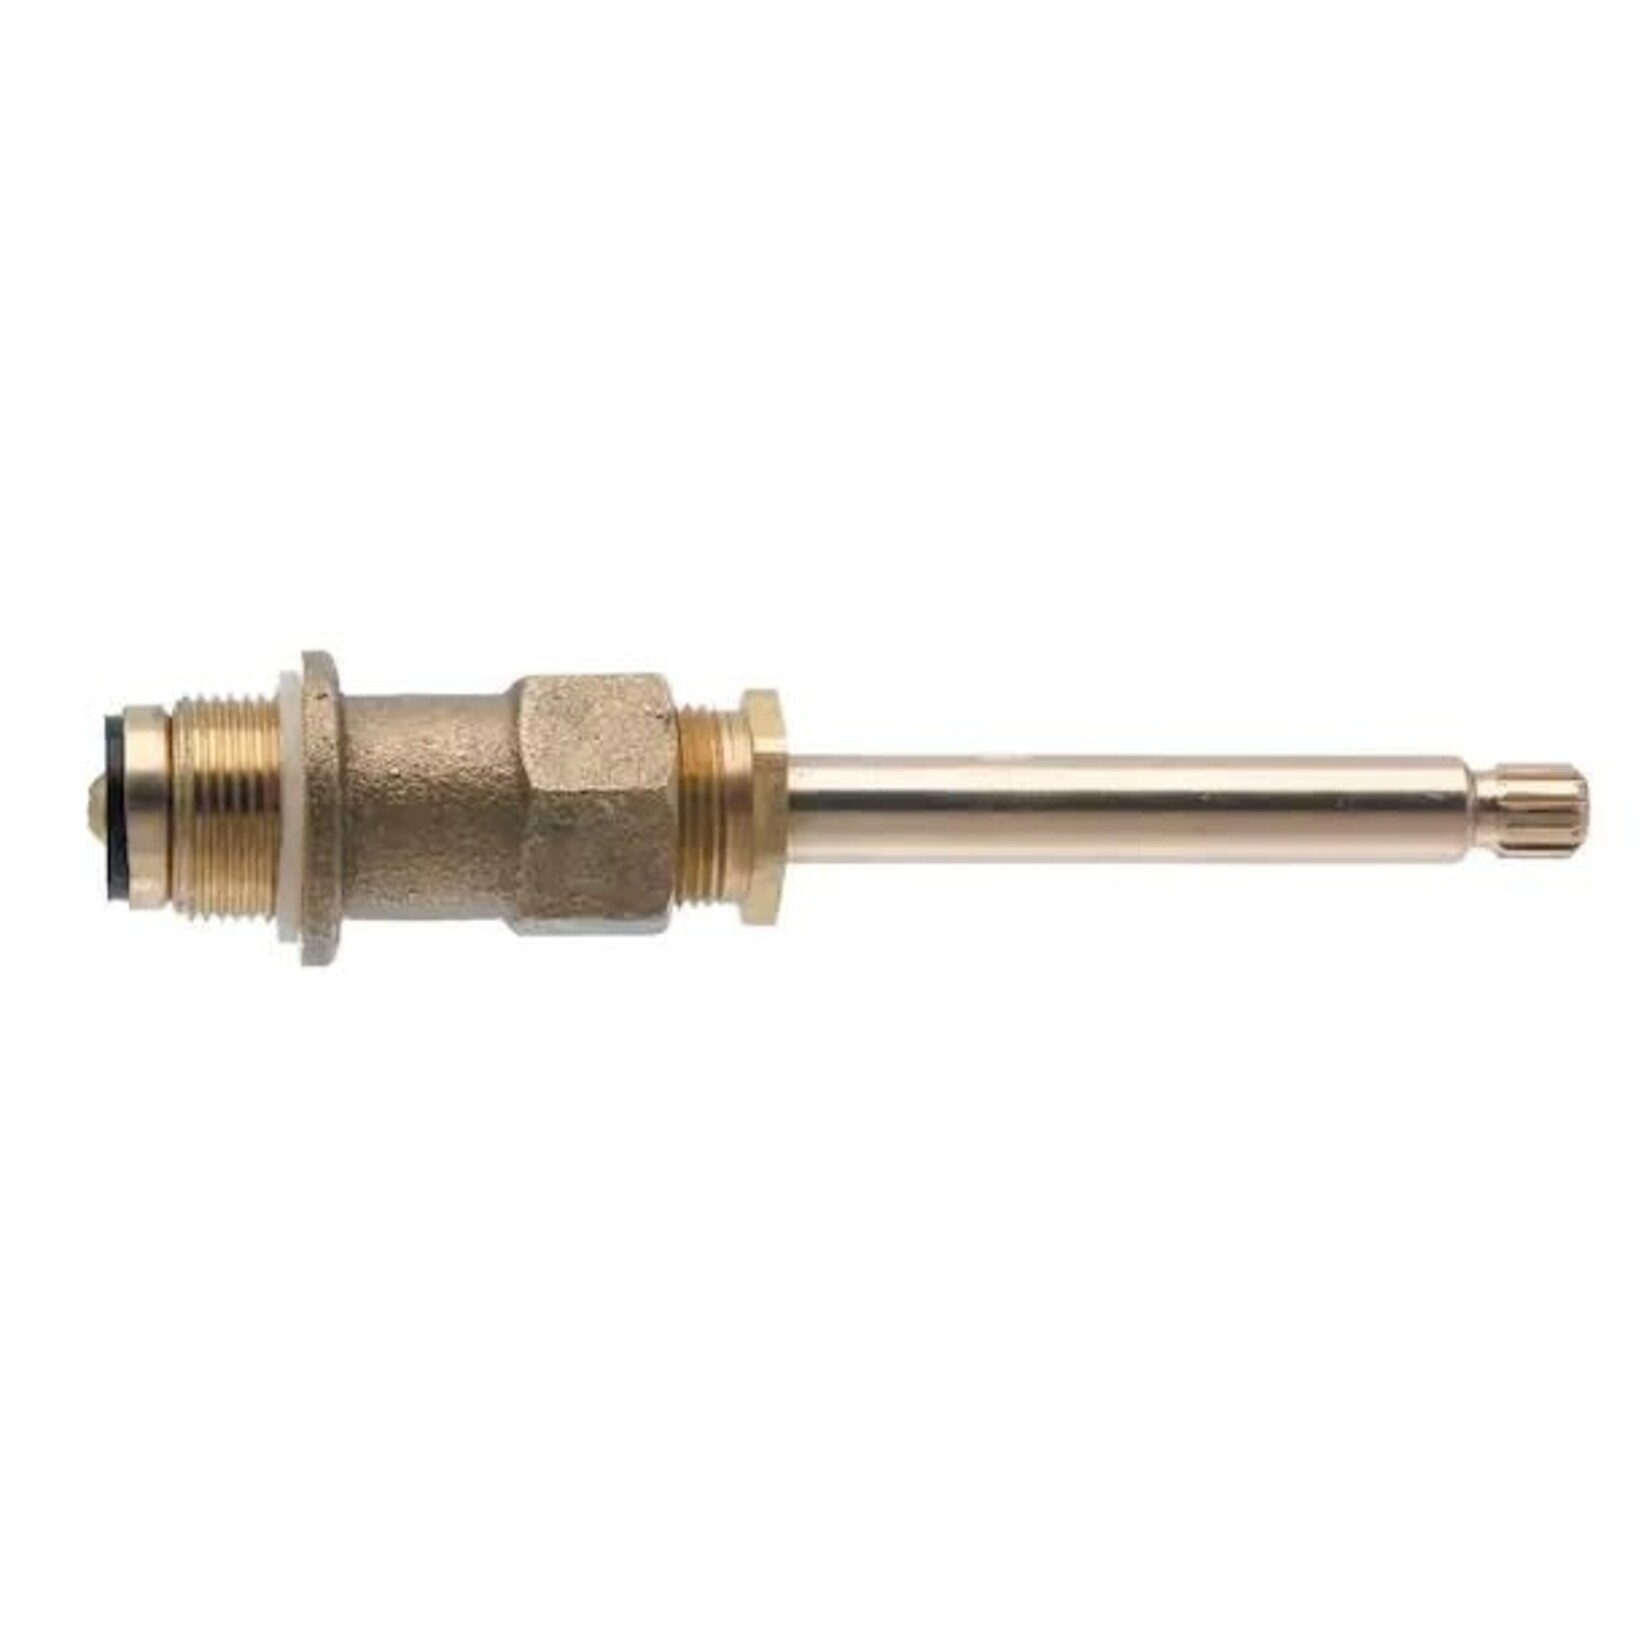 DANCO DANCO HOT AND COLD STEM FOR PRICE PFISTER (12H-2H/C)